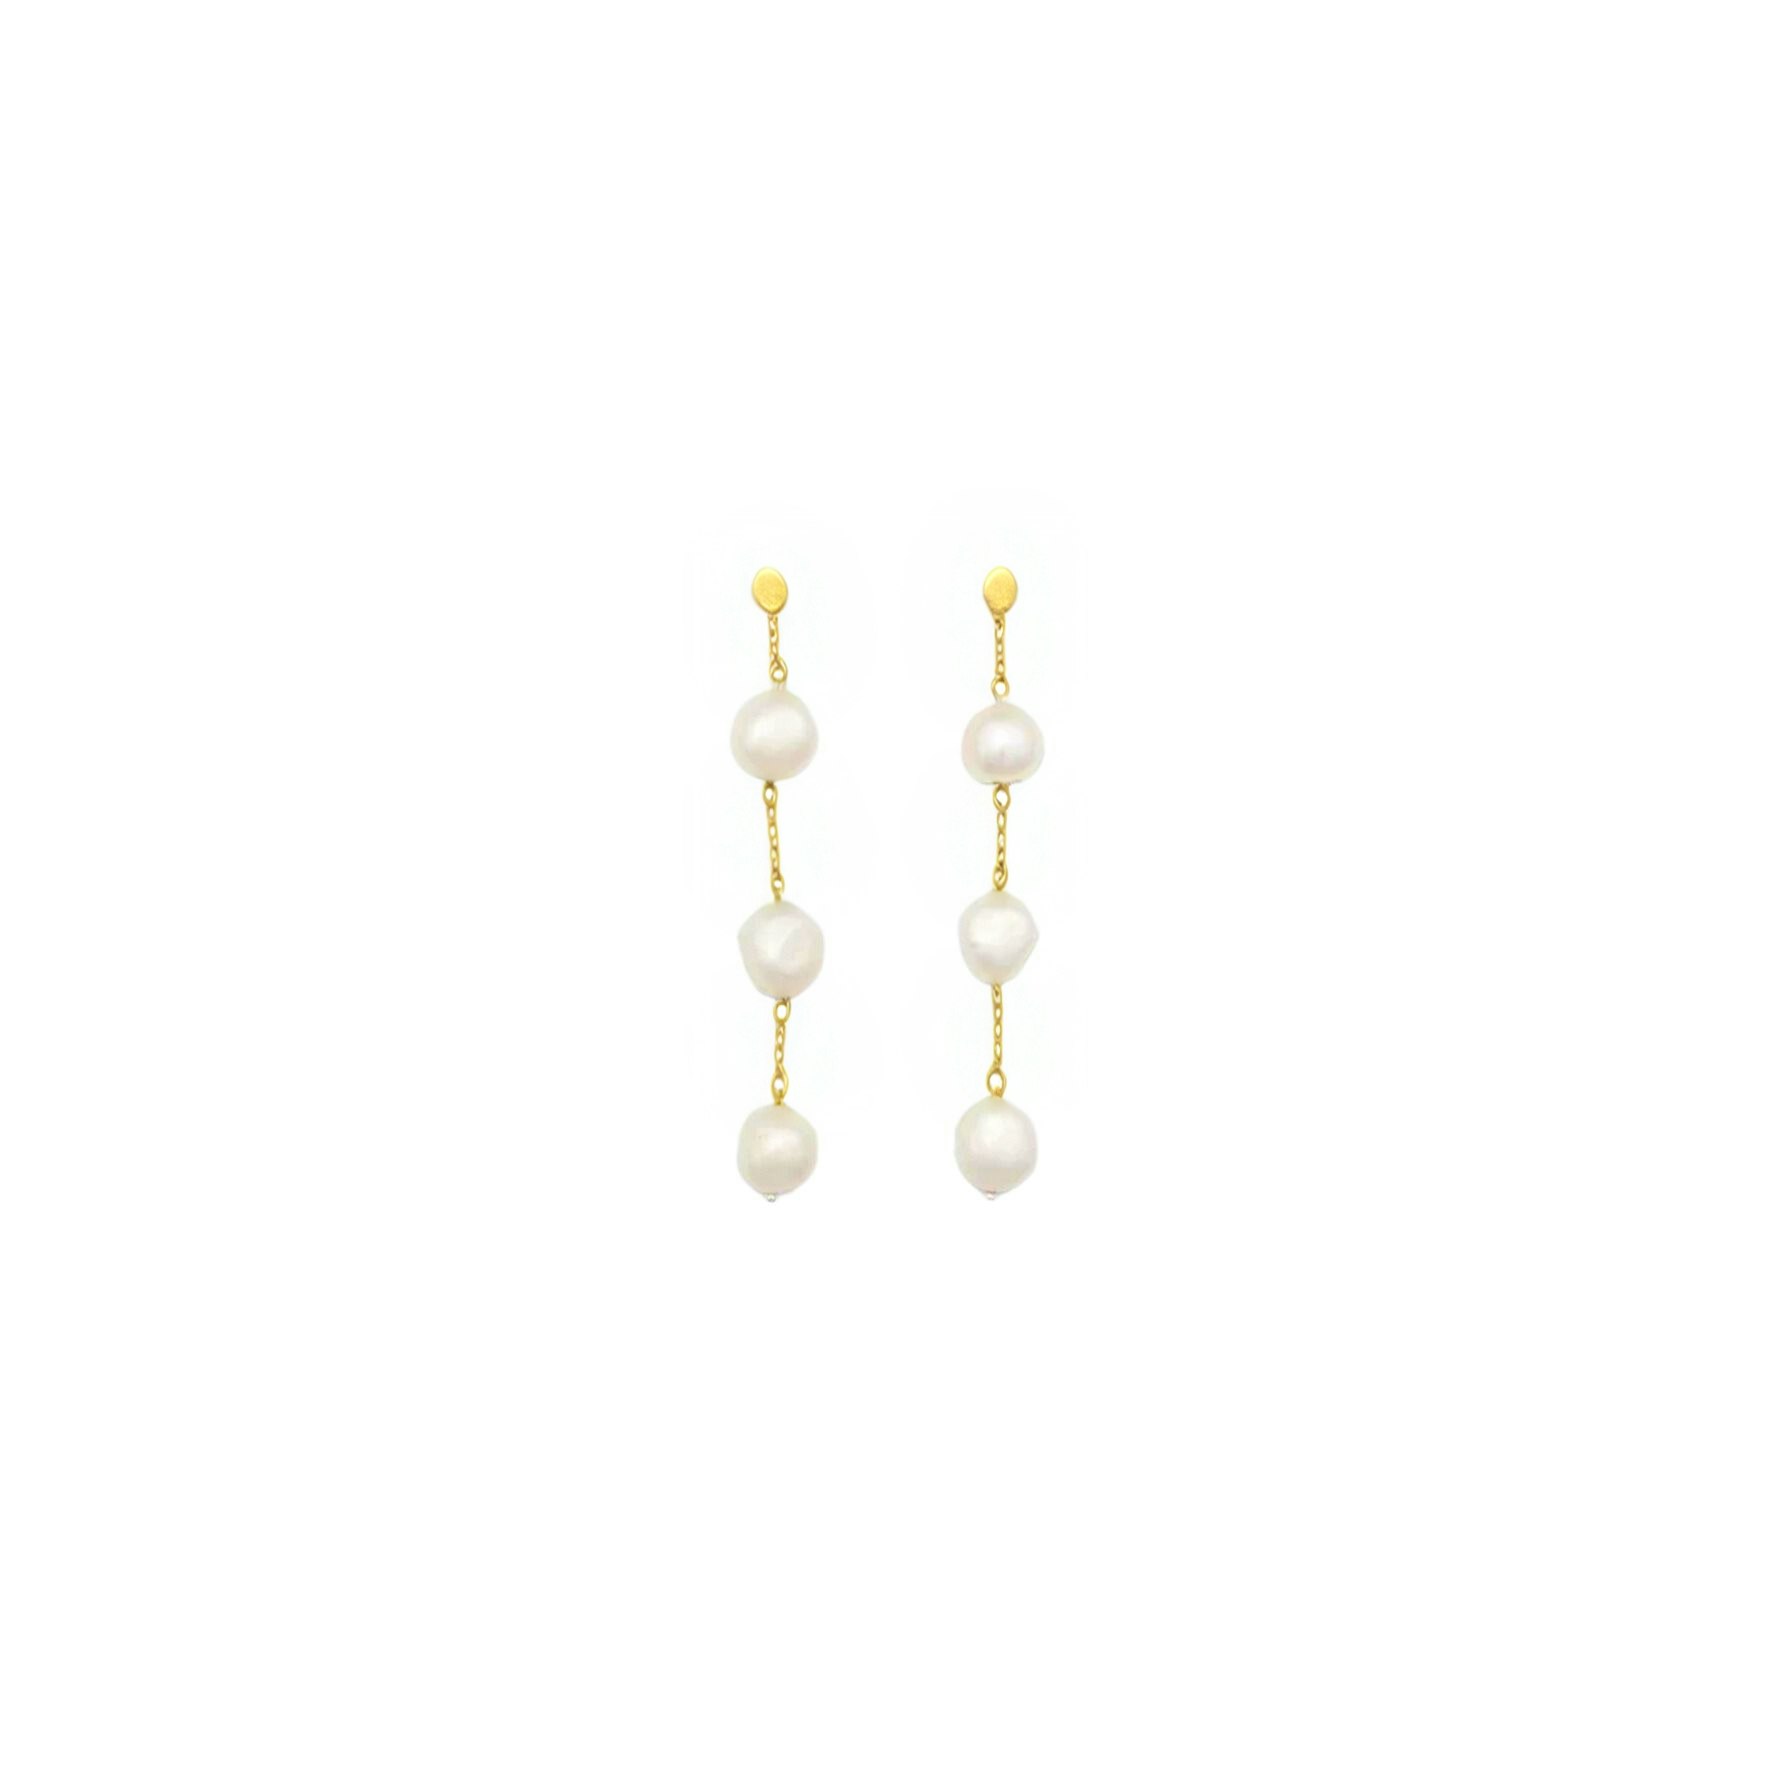 3-Pearls Earchains from Sorelle Jewellery in Goldplated Silver Sterling 925